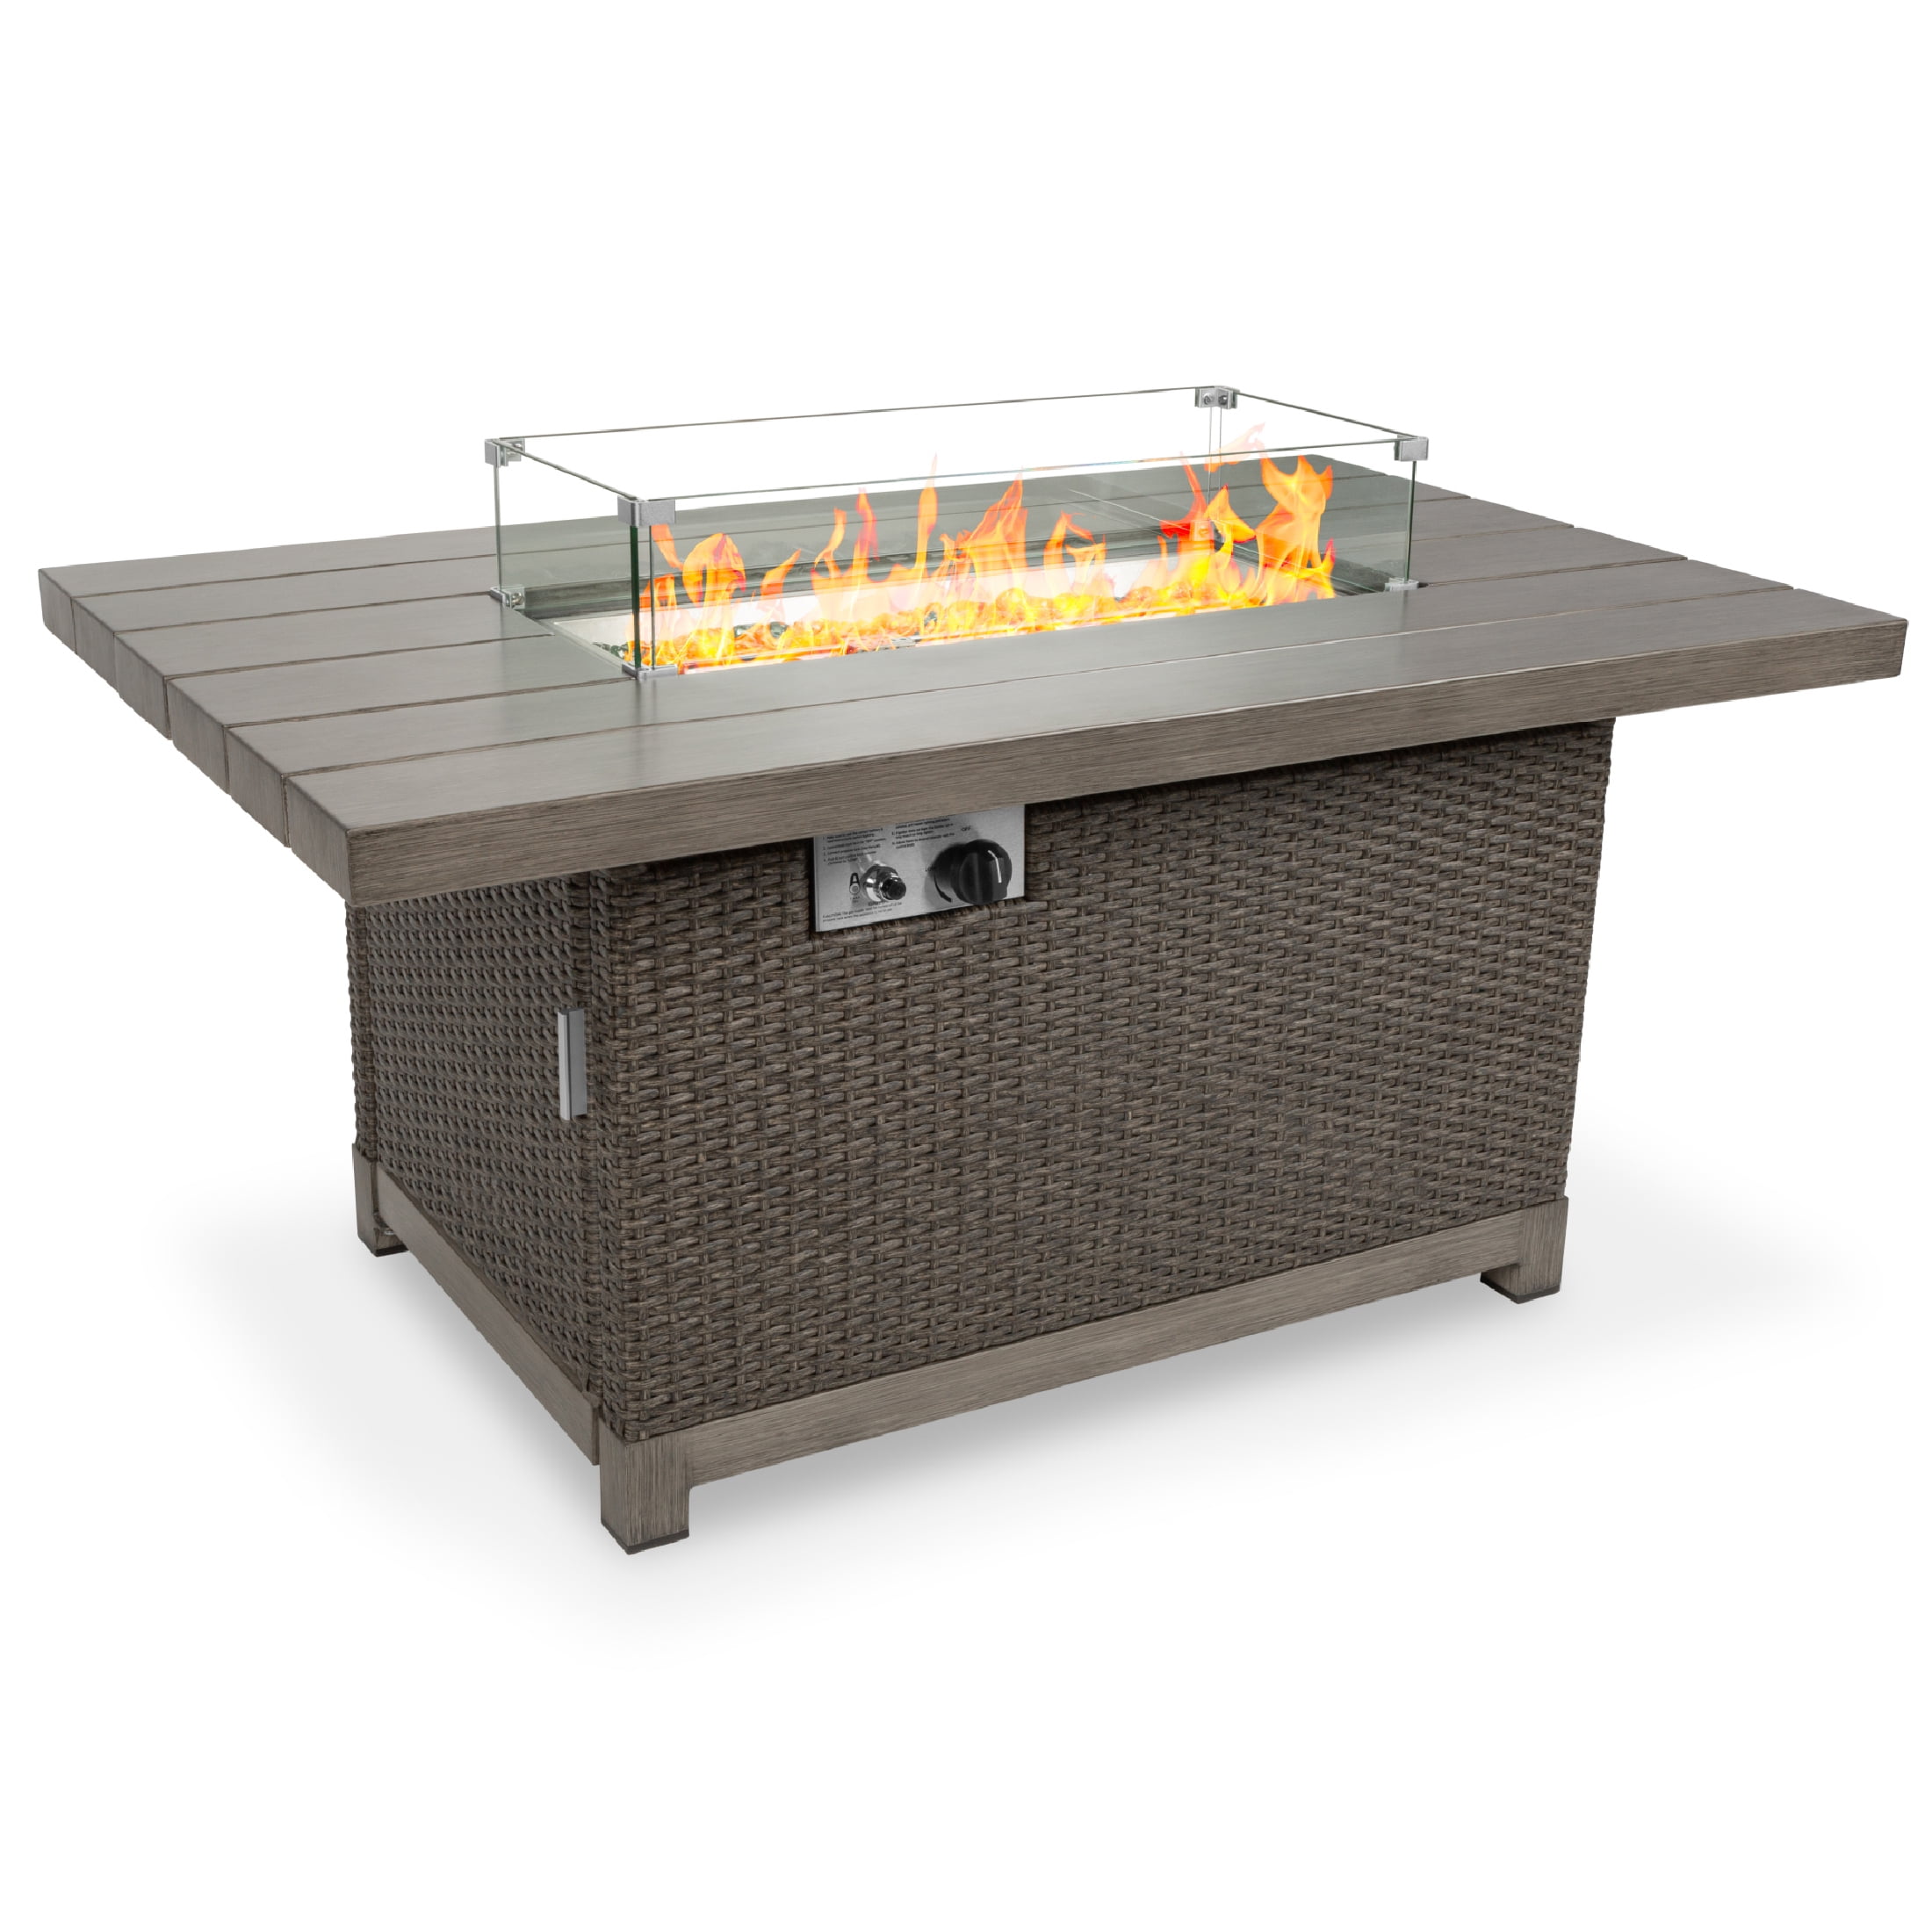 52in Wicker Propane Gas Fire Pit Table, Carter Hills 57 Gas Fire Pit